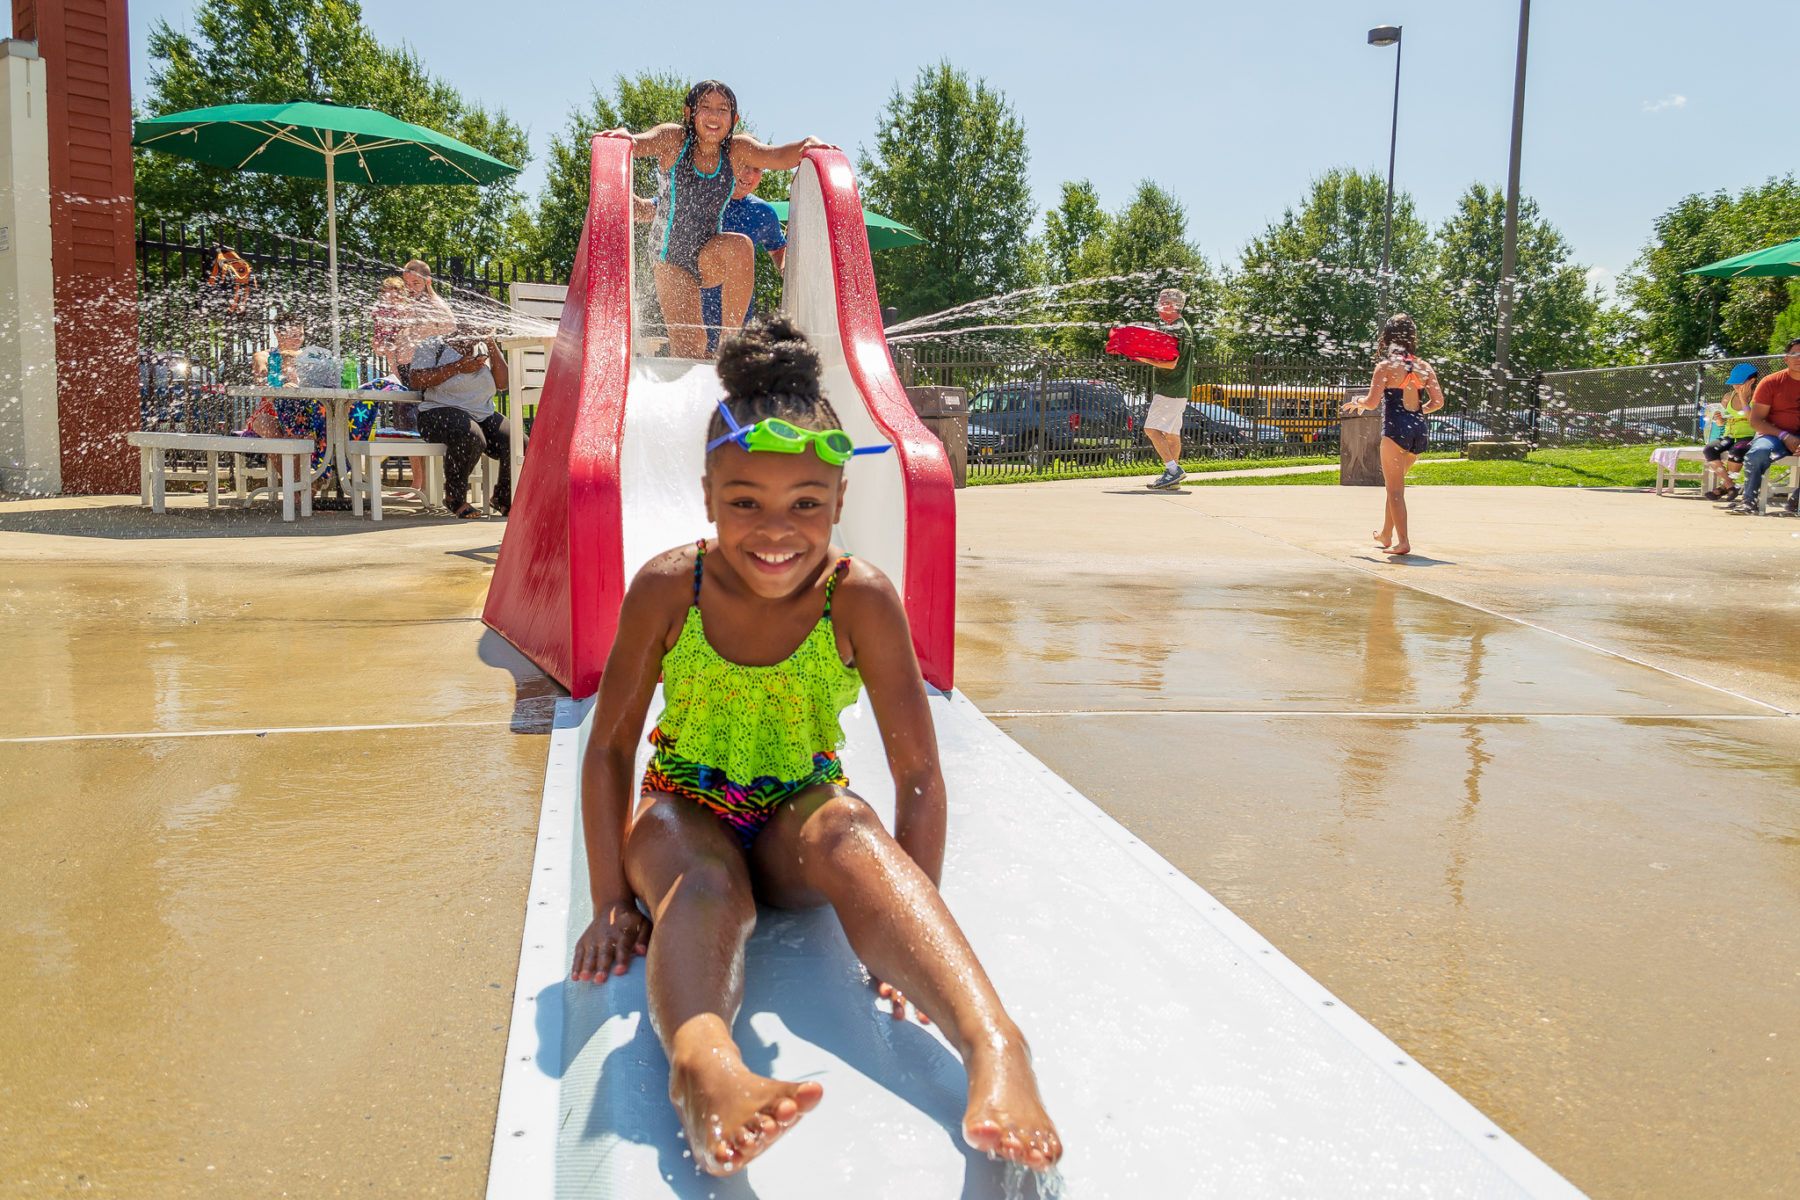 A girl smiles after going down a small slide at the South Germantown SplashPark